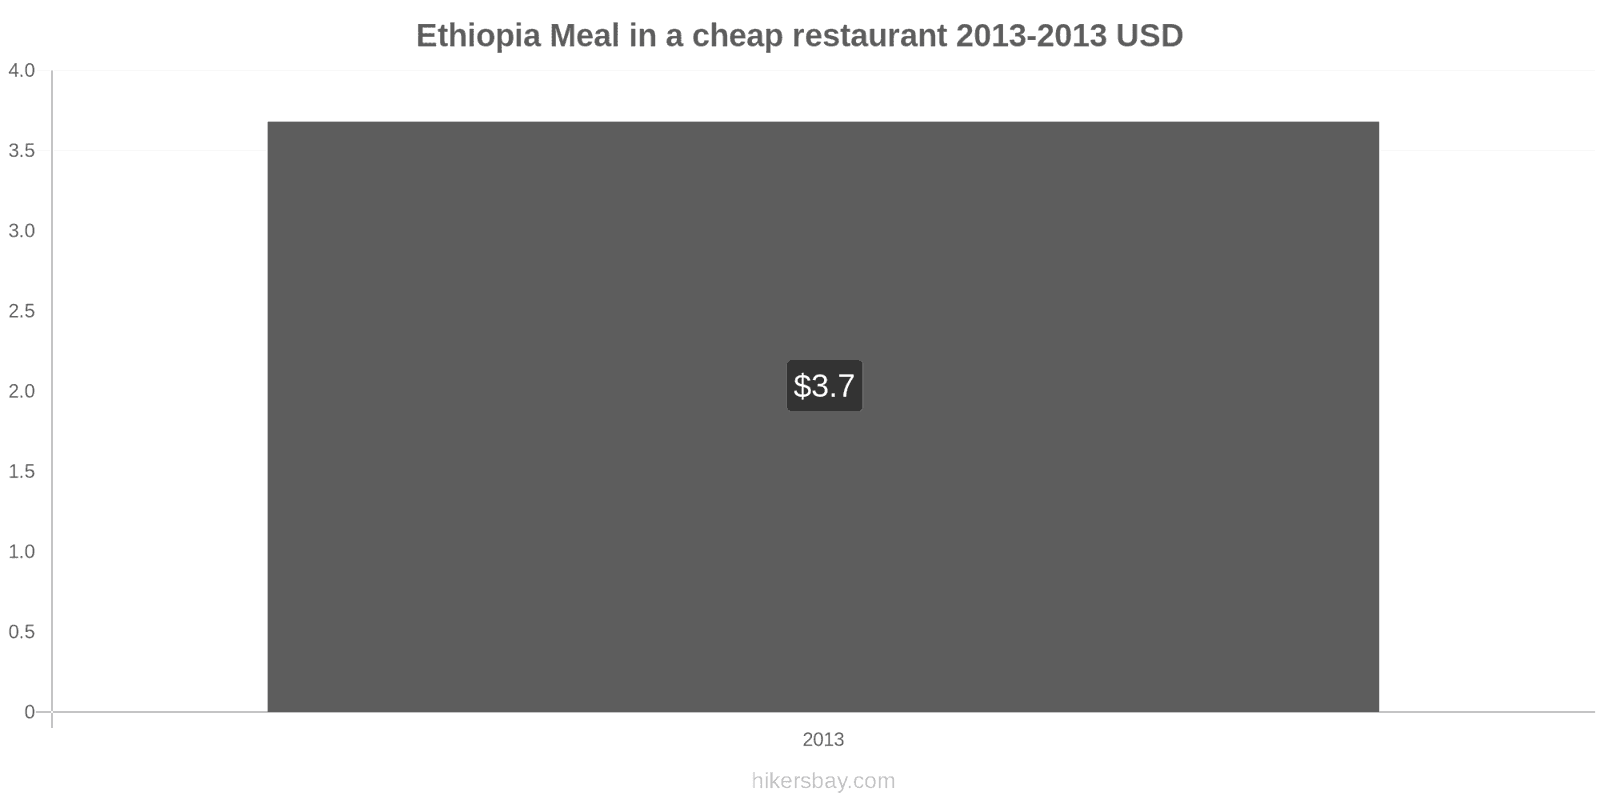 Ethiopia price changes Meal in a cheap restaurant hikersbay.com